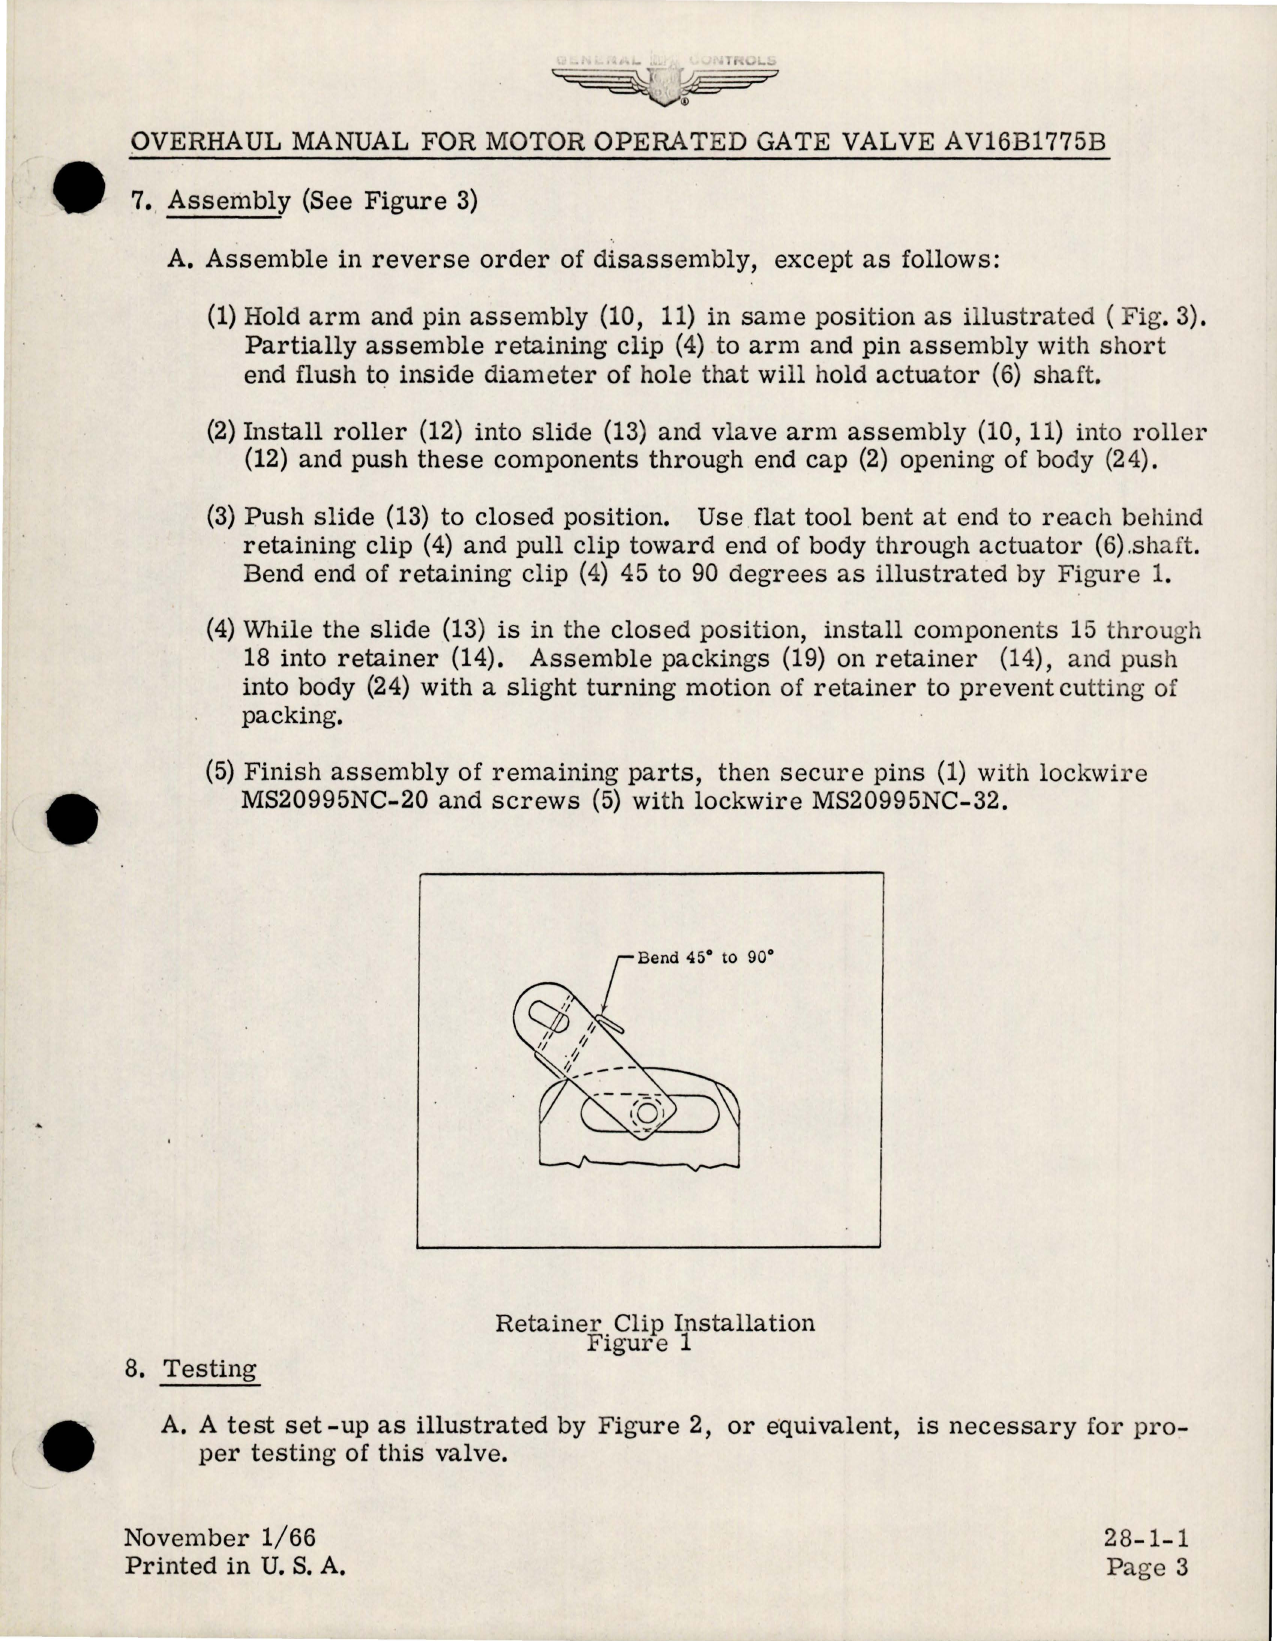 Sample page 5 from AirCorps Library document: Overhaul Manual for Motor Operated Gate Valve - AV16B1775B 